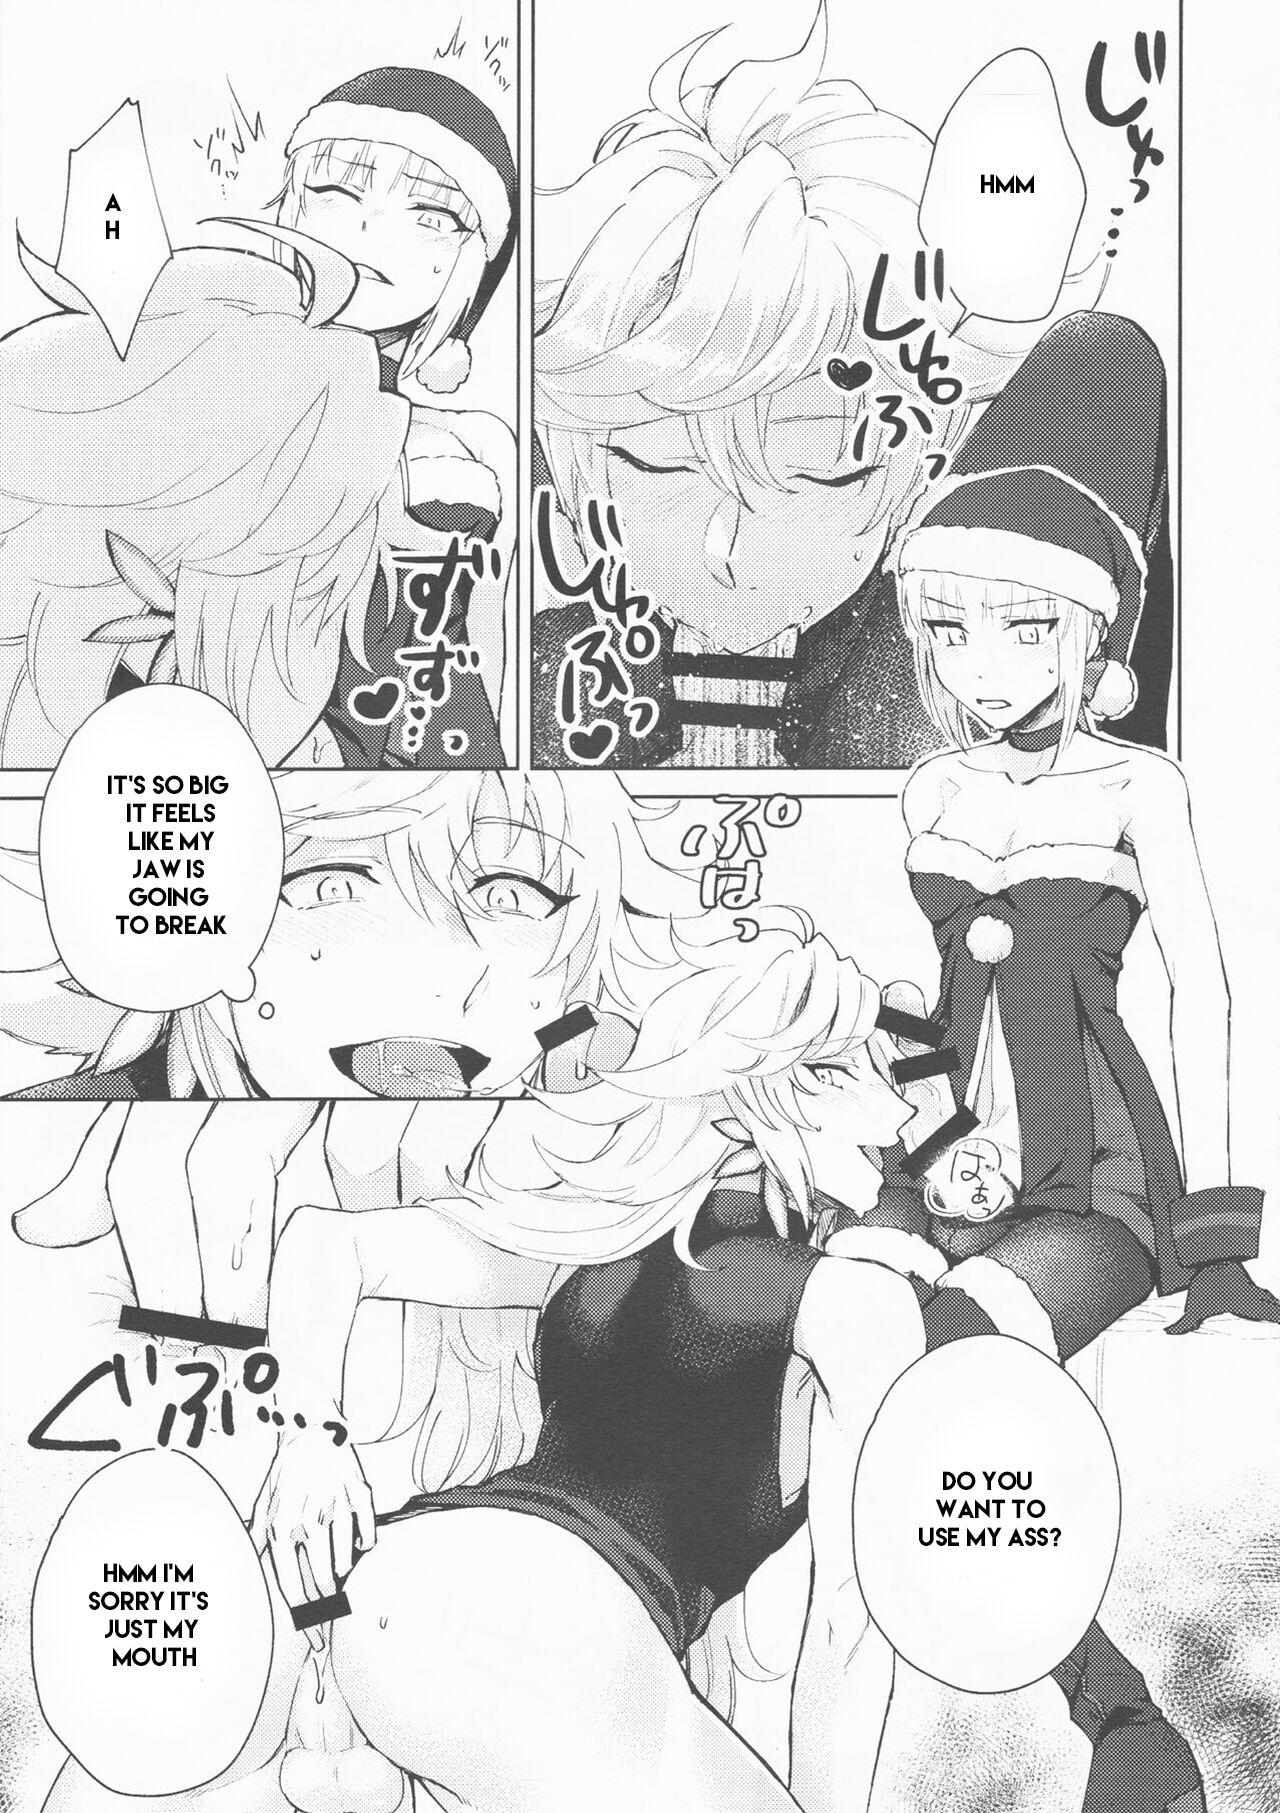 Hot Pussy (Hazama)] Hero Milking (FateGrand Order) part 1 machine translated - Fate grand order Doctor - Page 7